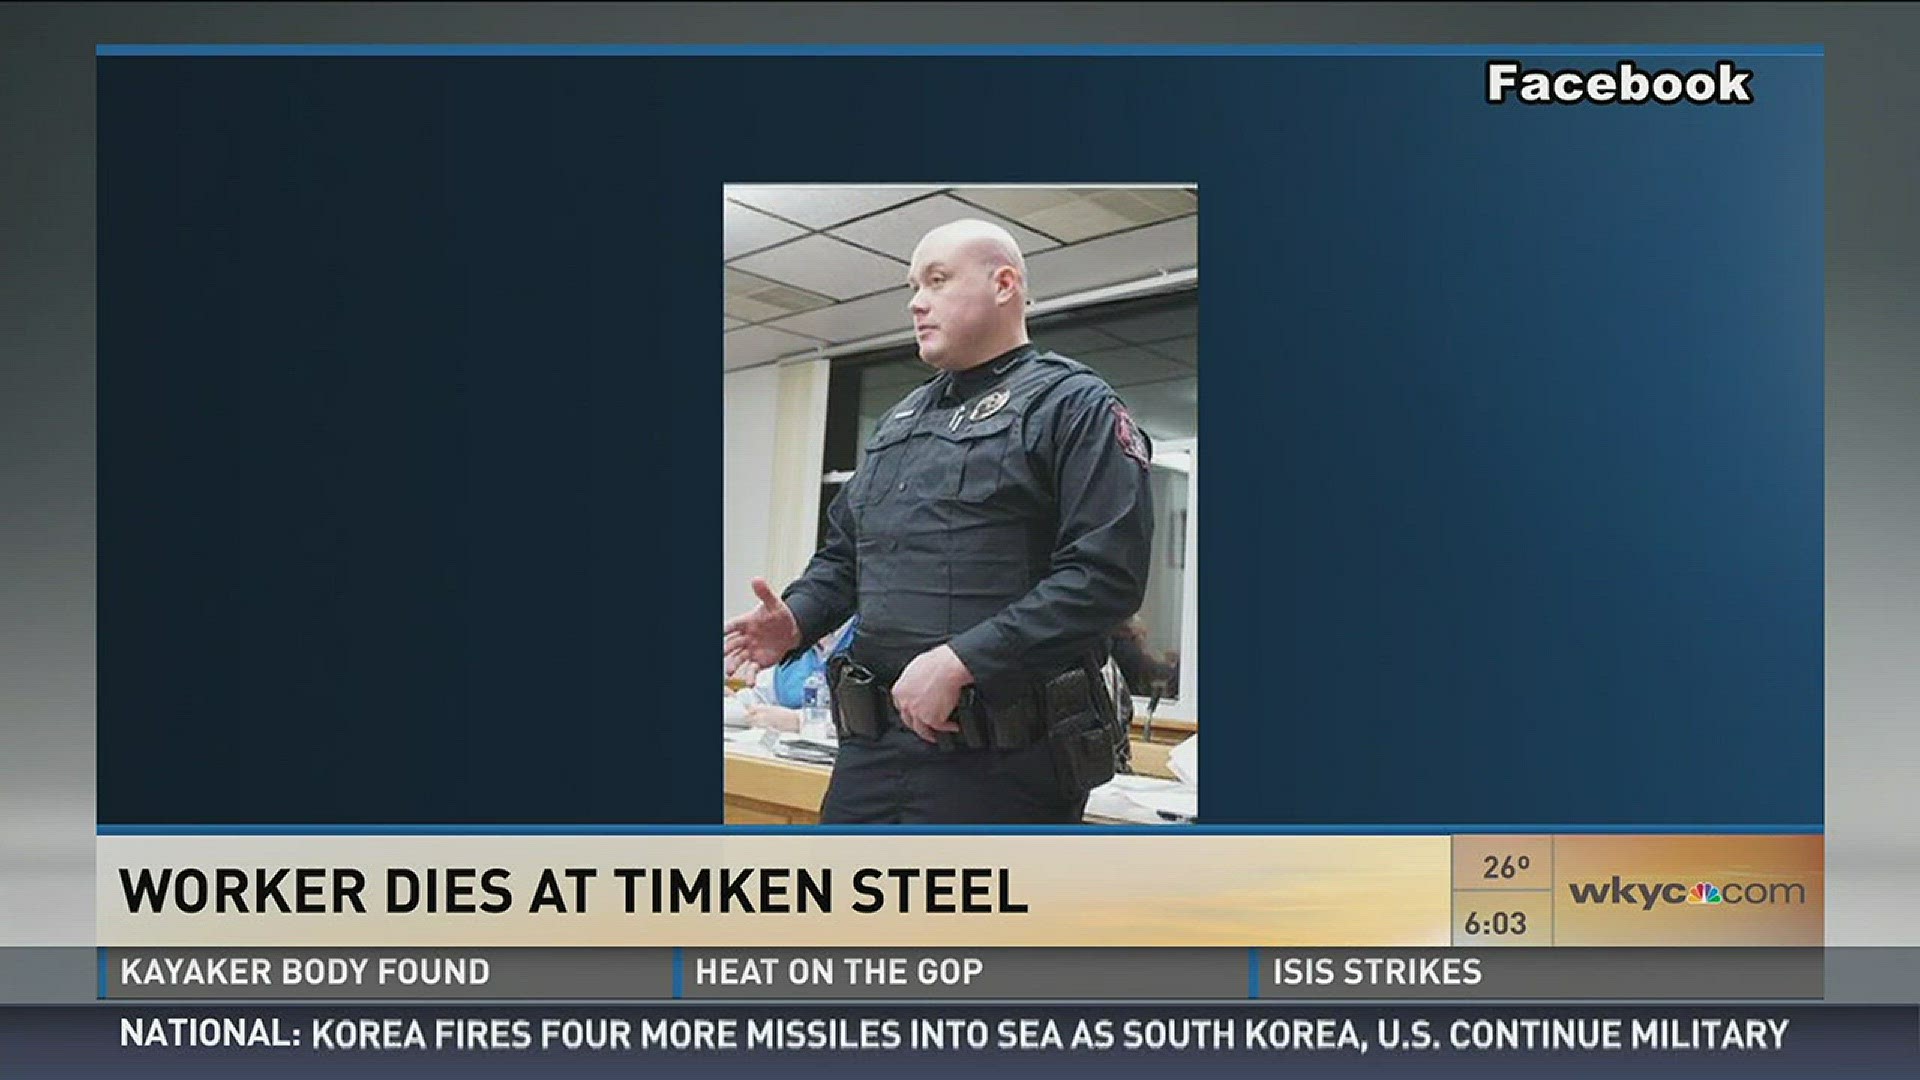 March 21, 2016: The man who died at TimkenSteel on Sunday has been identified by the Creston Police Department as Kenny Ray Jr.